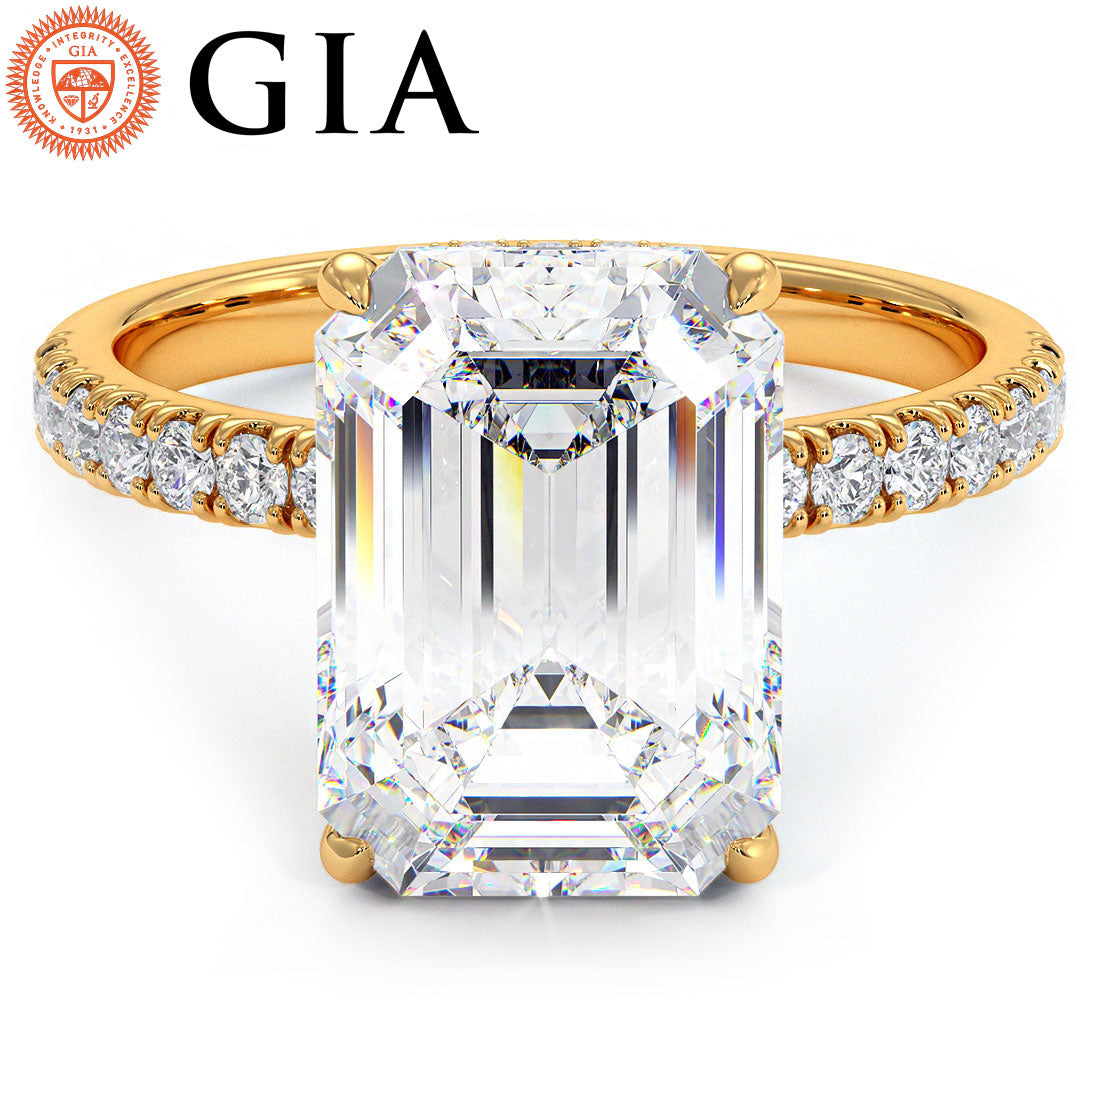 4.83ctw GIA Certified E-VS1 Emerald Cut Under Halo Petite Micropavé Lab Grown Diamond Engagement Ring set in 14k Yellow Gold